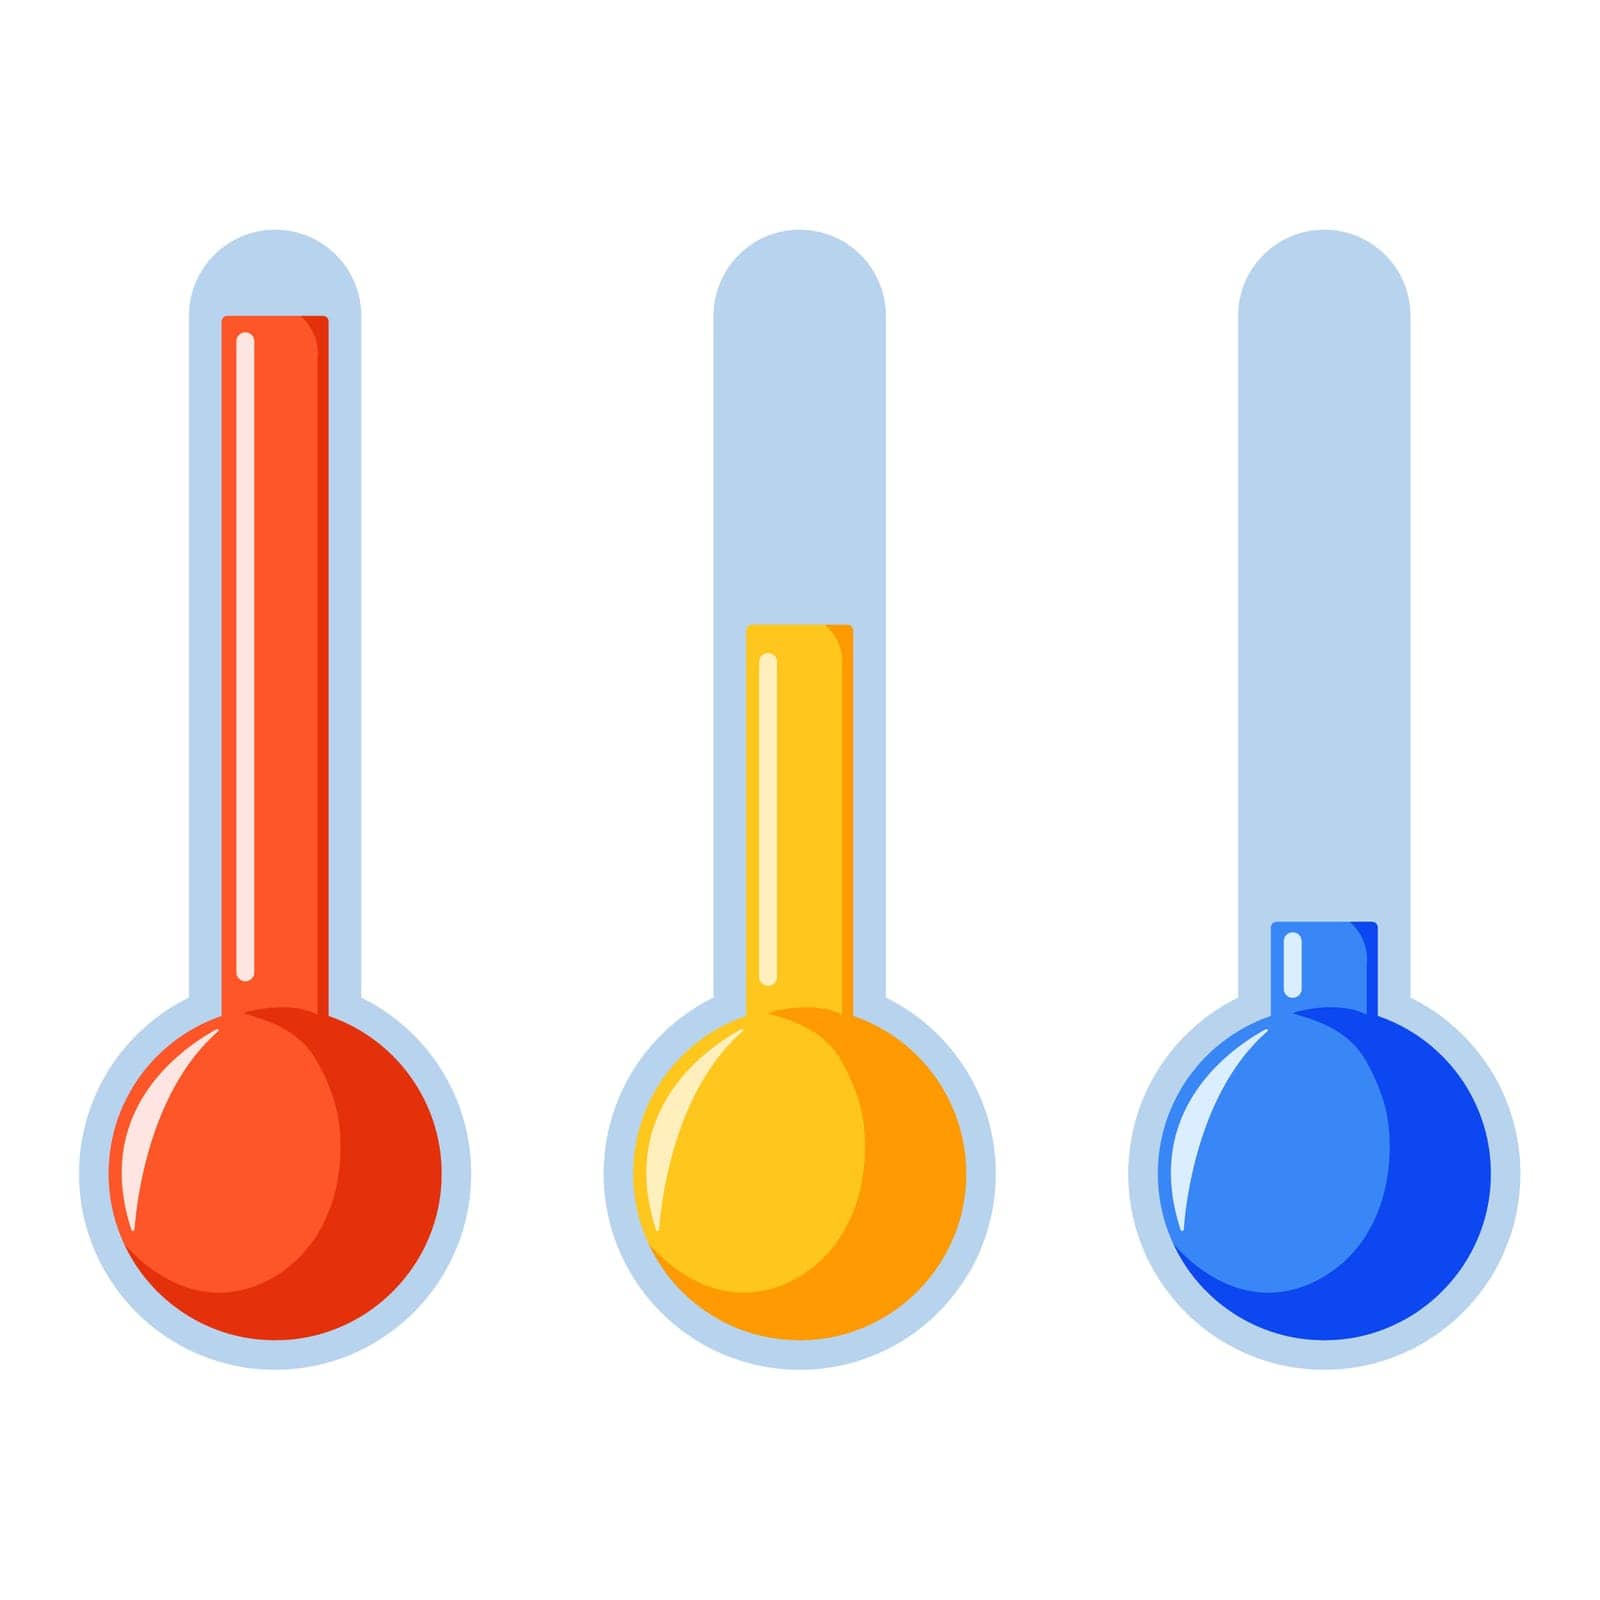 Thermometers icons in cartoon style. Measure hot and cold temperature, forecast, climate and meteorology. Vector illustration isolated on a white background. by IrynaShautsova